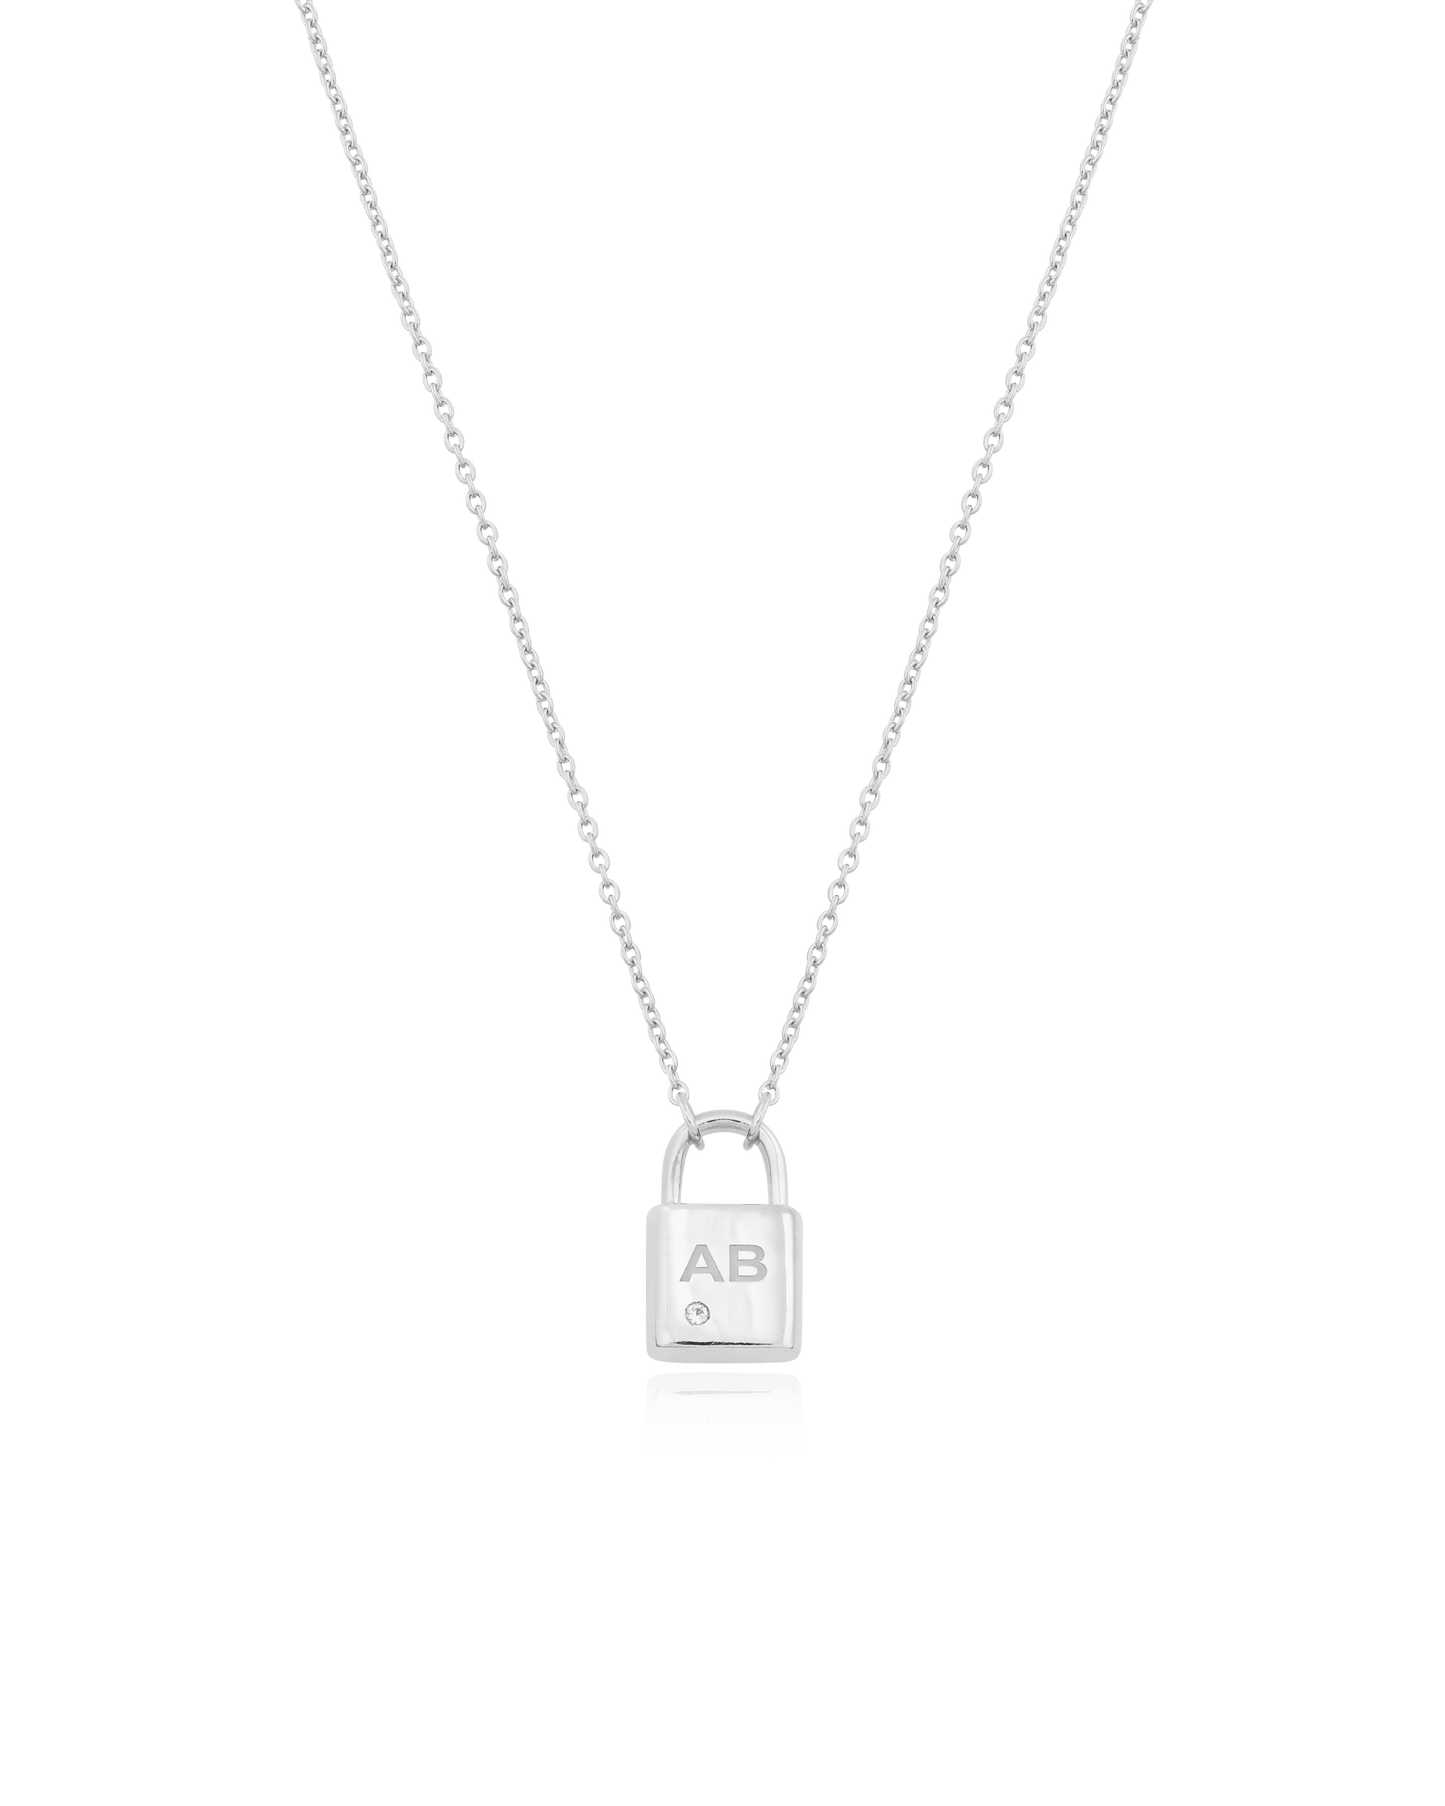 Pont Lock Necklace w/ Diamond - 925 Sterling Silver Necklaces magal-dev 1 Initial 14" 